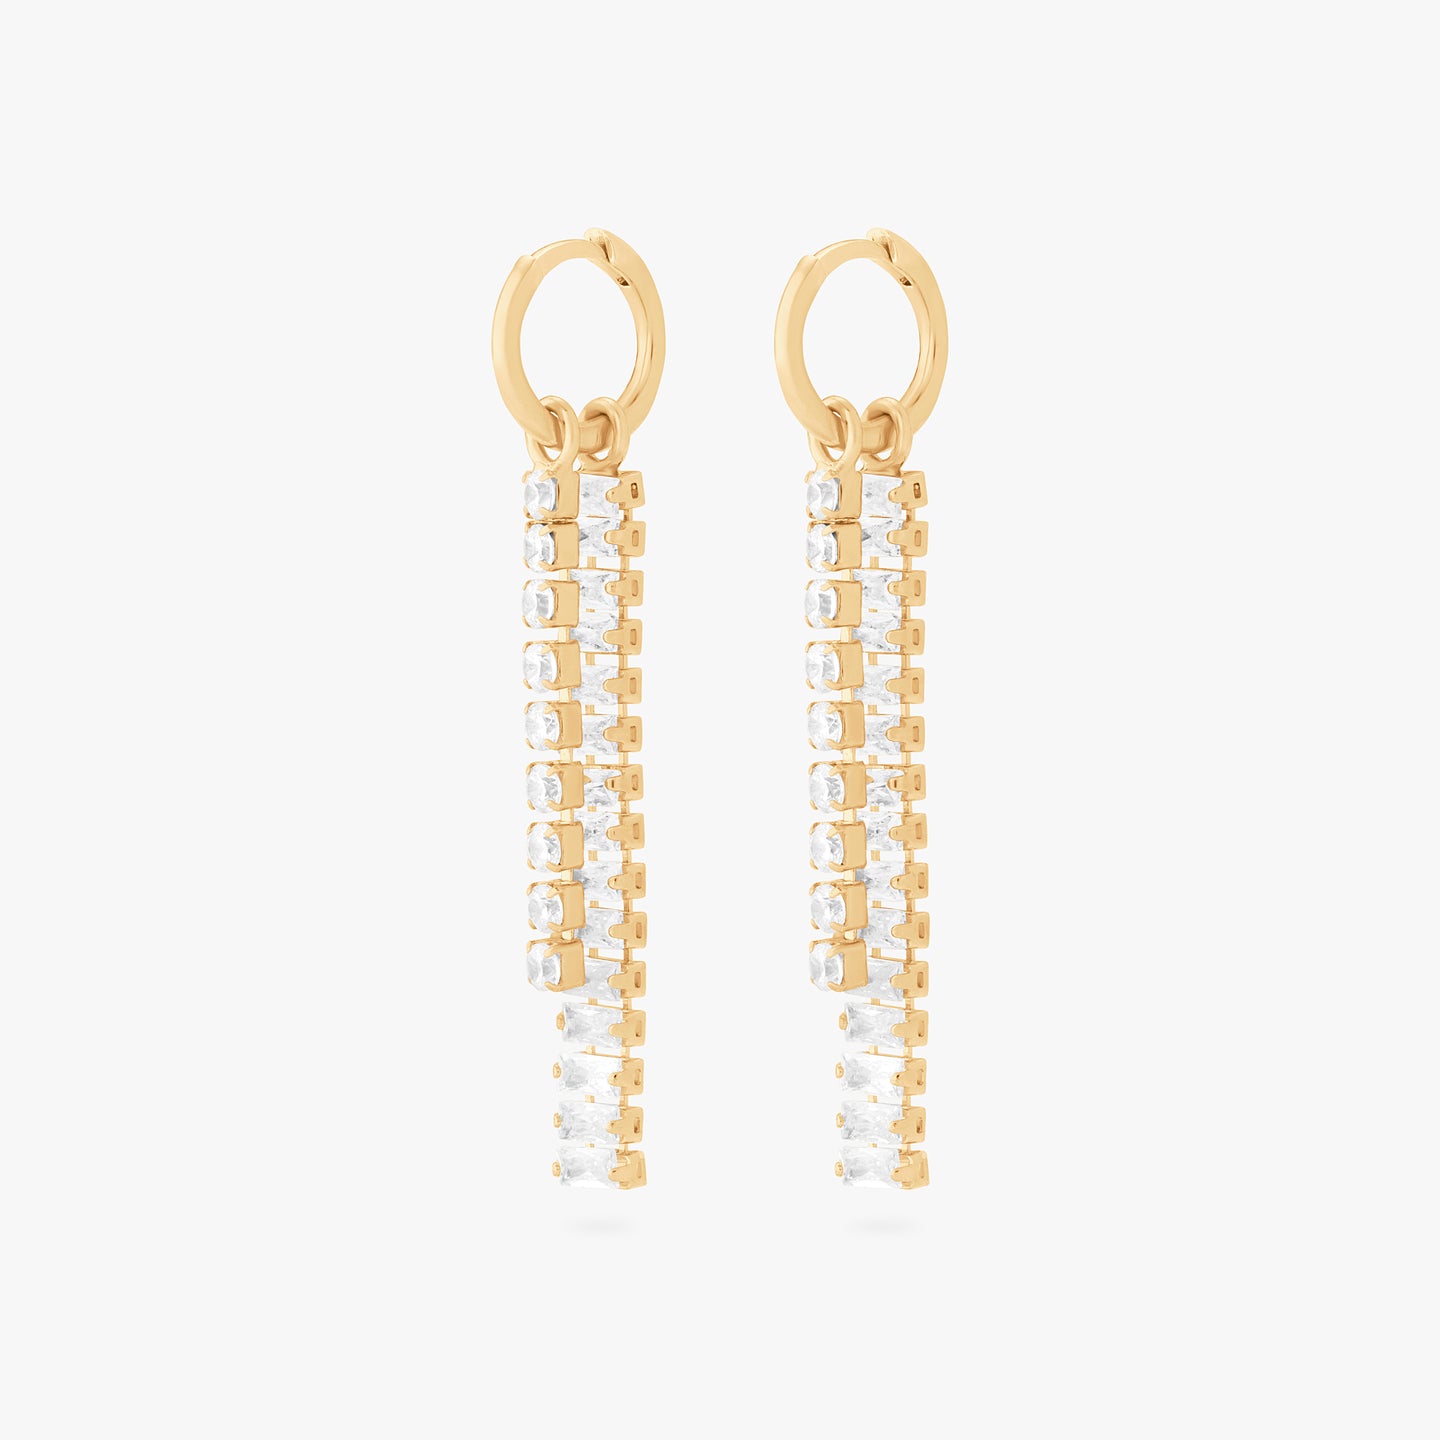 This is an image of a pair of gold small slim huggies with a charm that consists of a string of gold/clear CZs, and a charm that consists of gold/clear baguette CZs. [pair] color:null|gold/clear